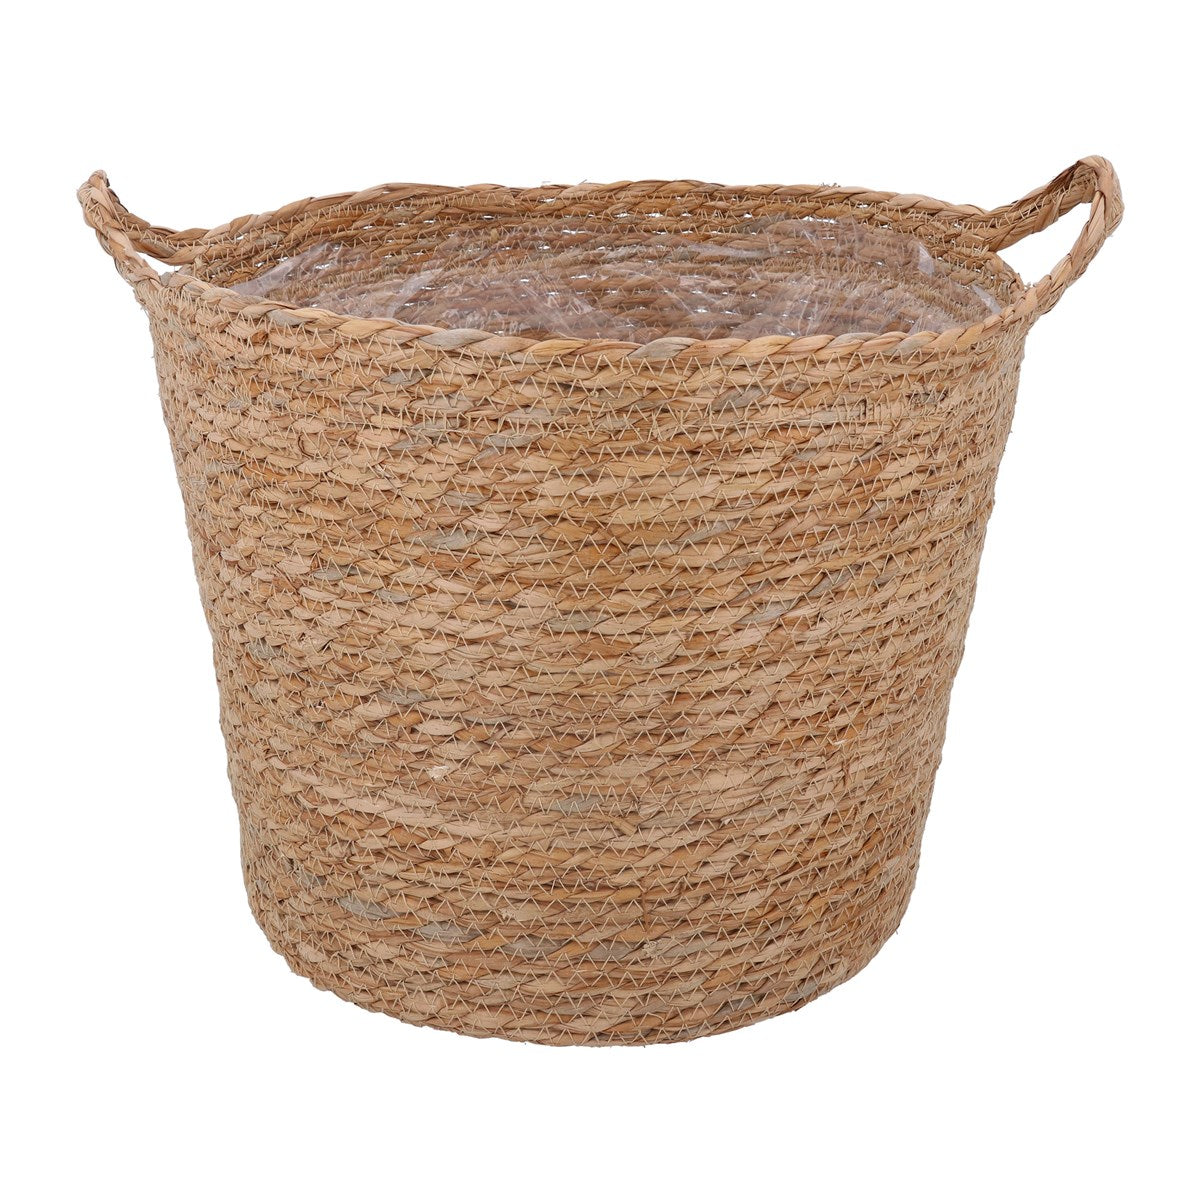 Natural Woven Basket with Handles - Large